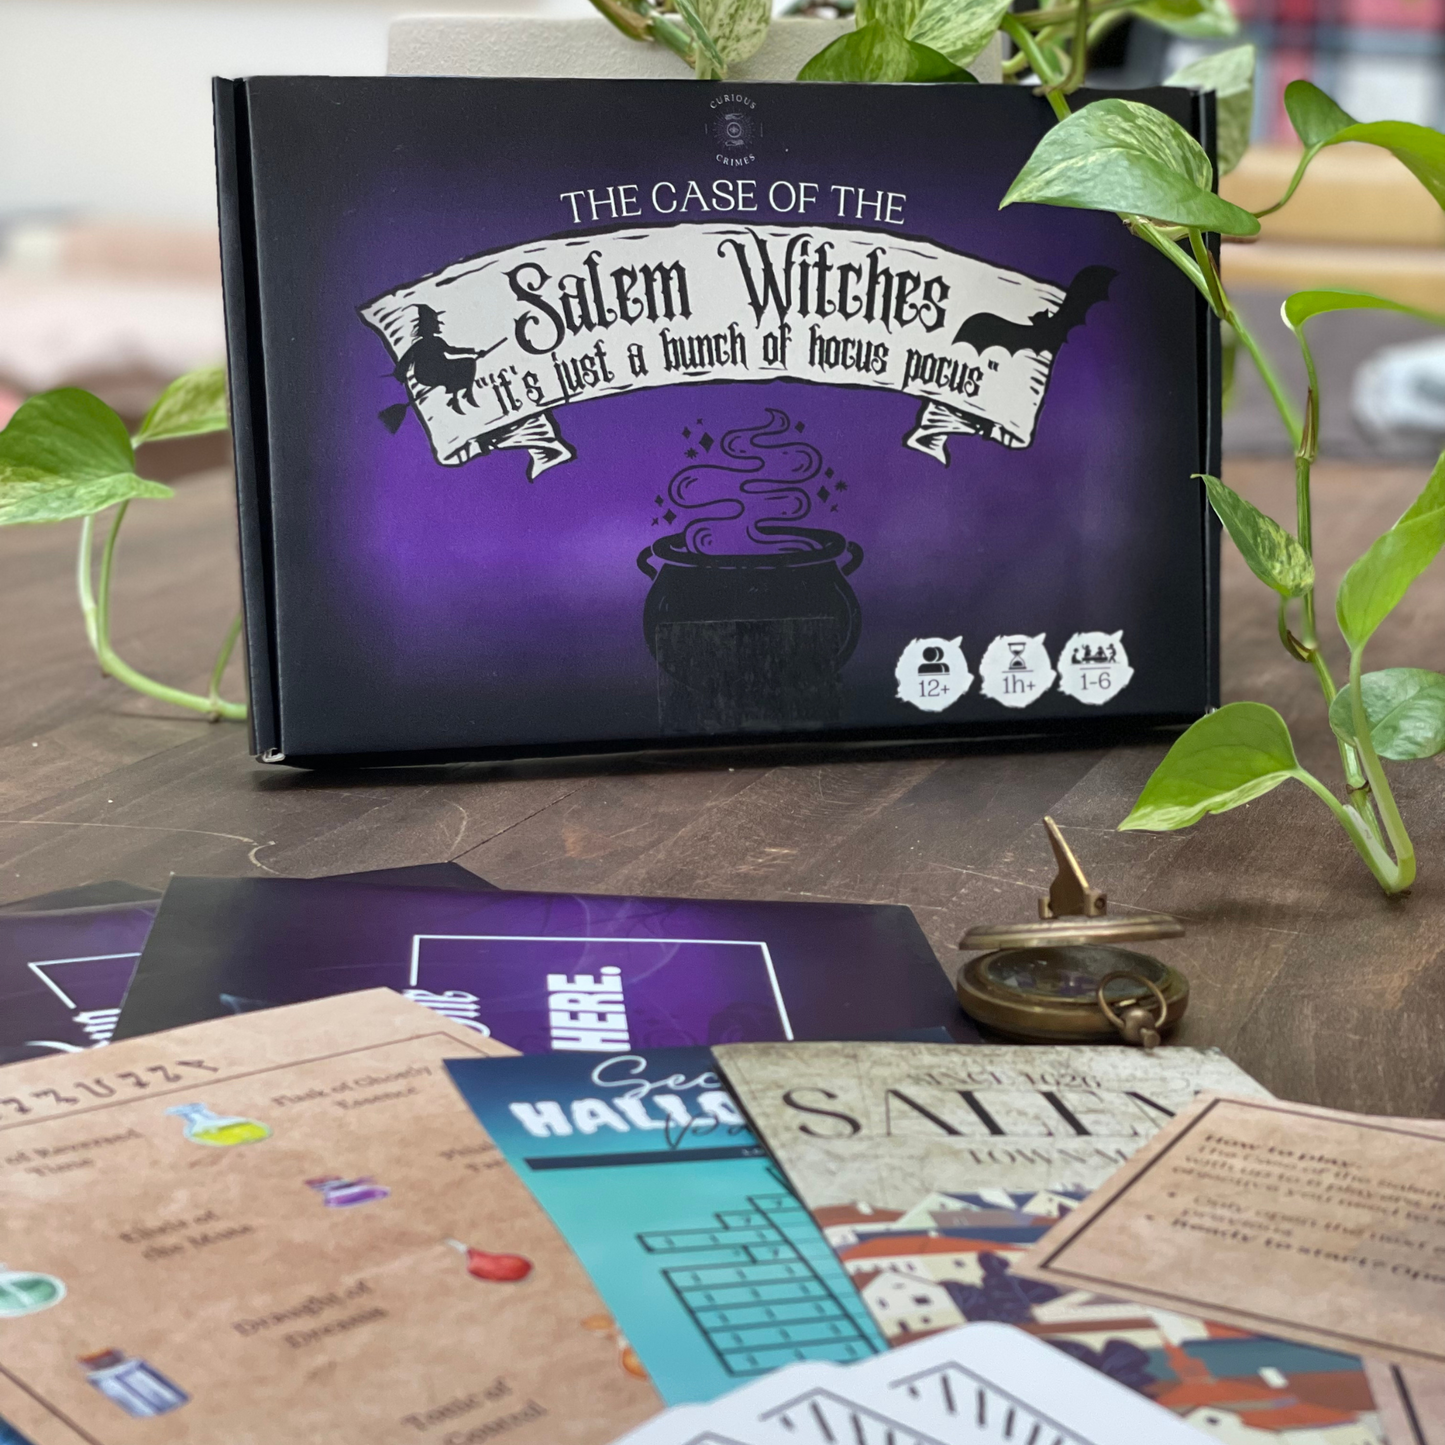 The Case of the Salem Witches